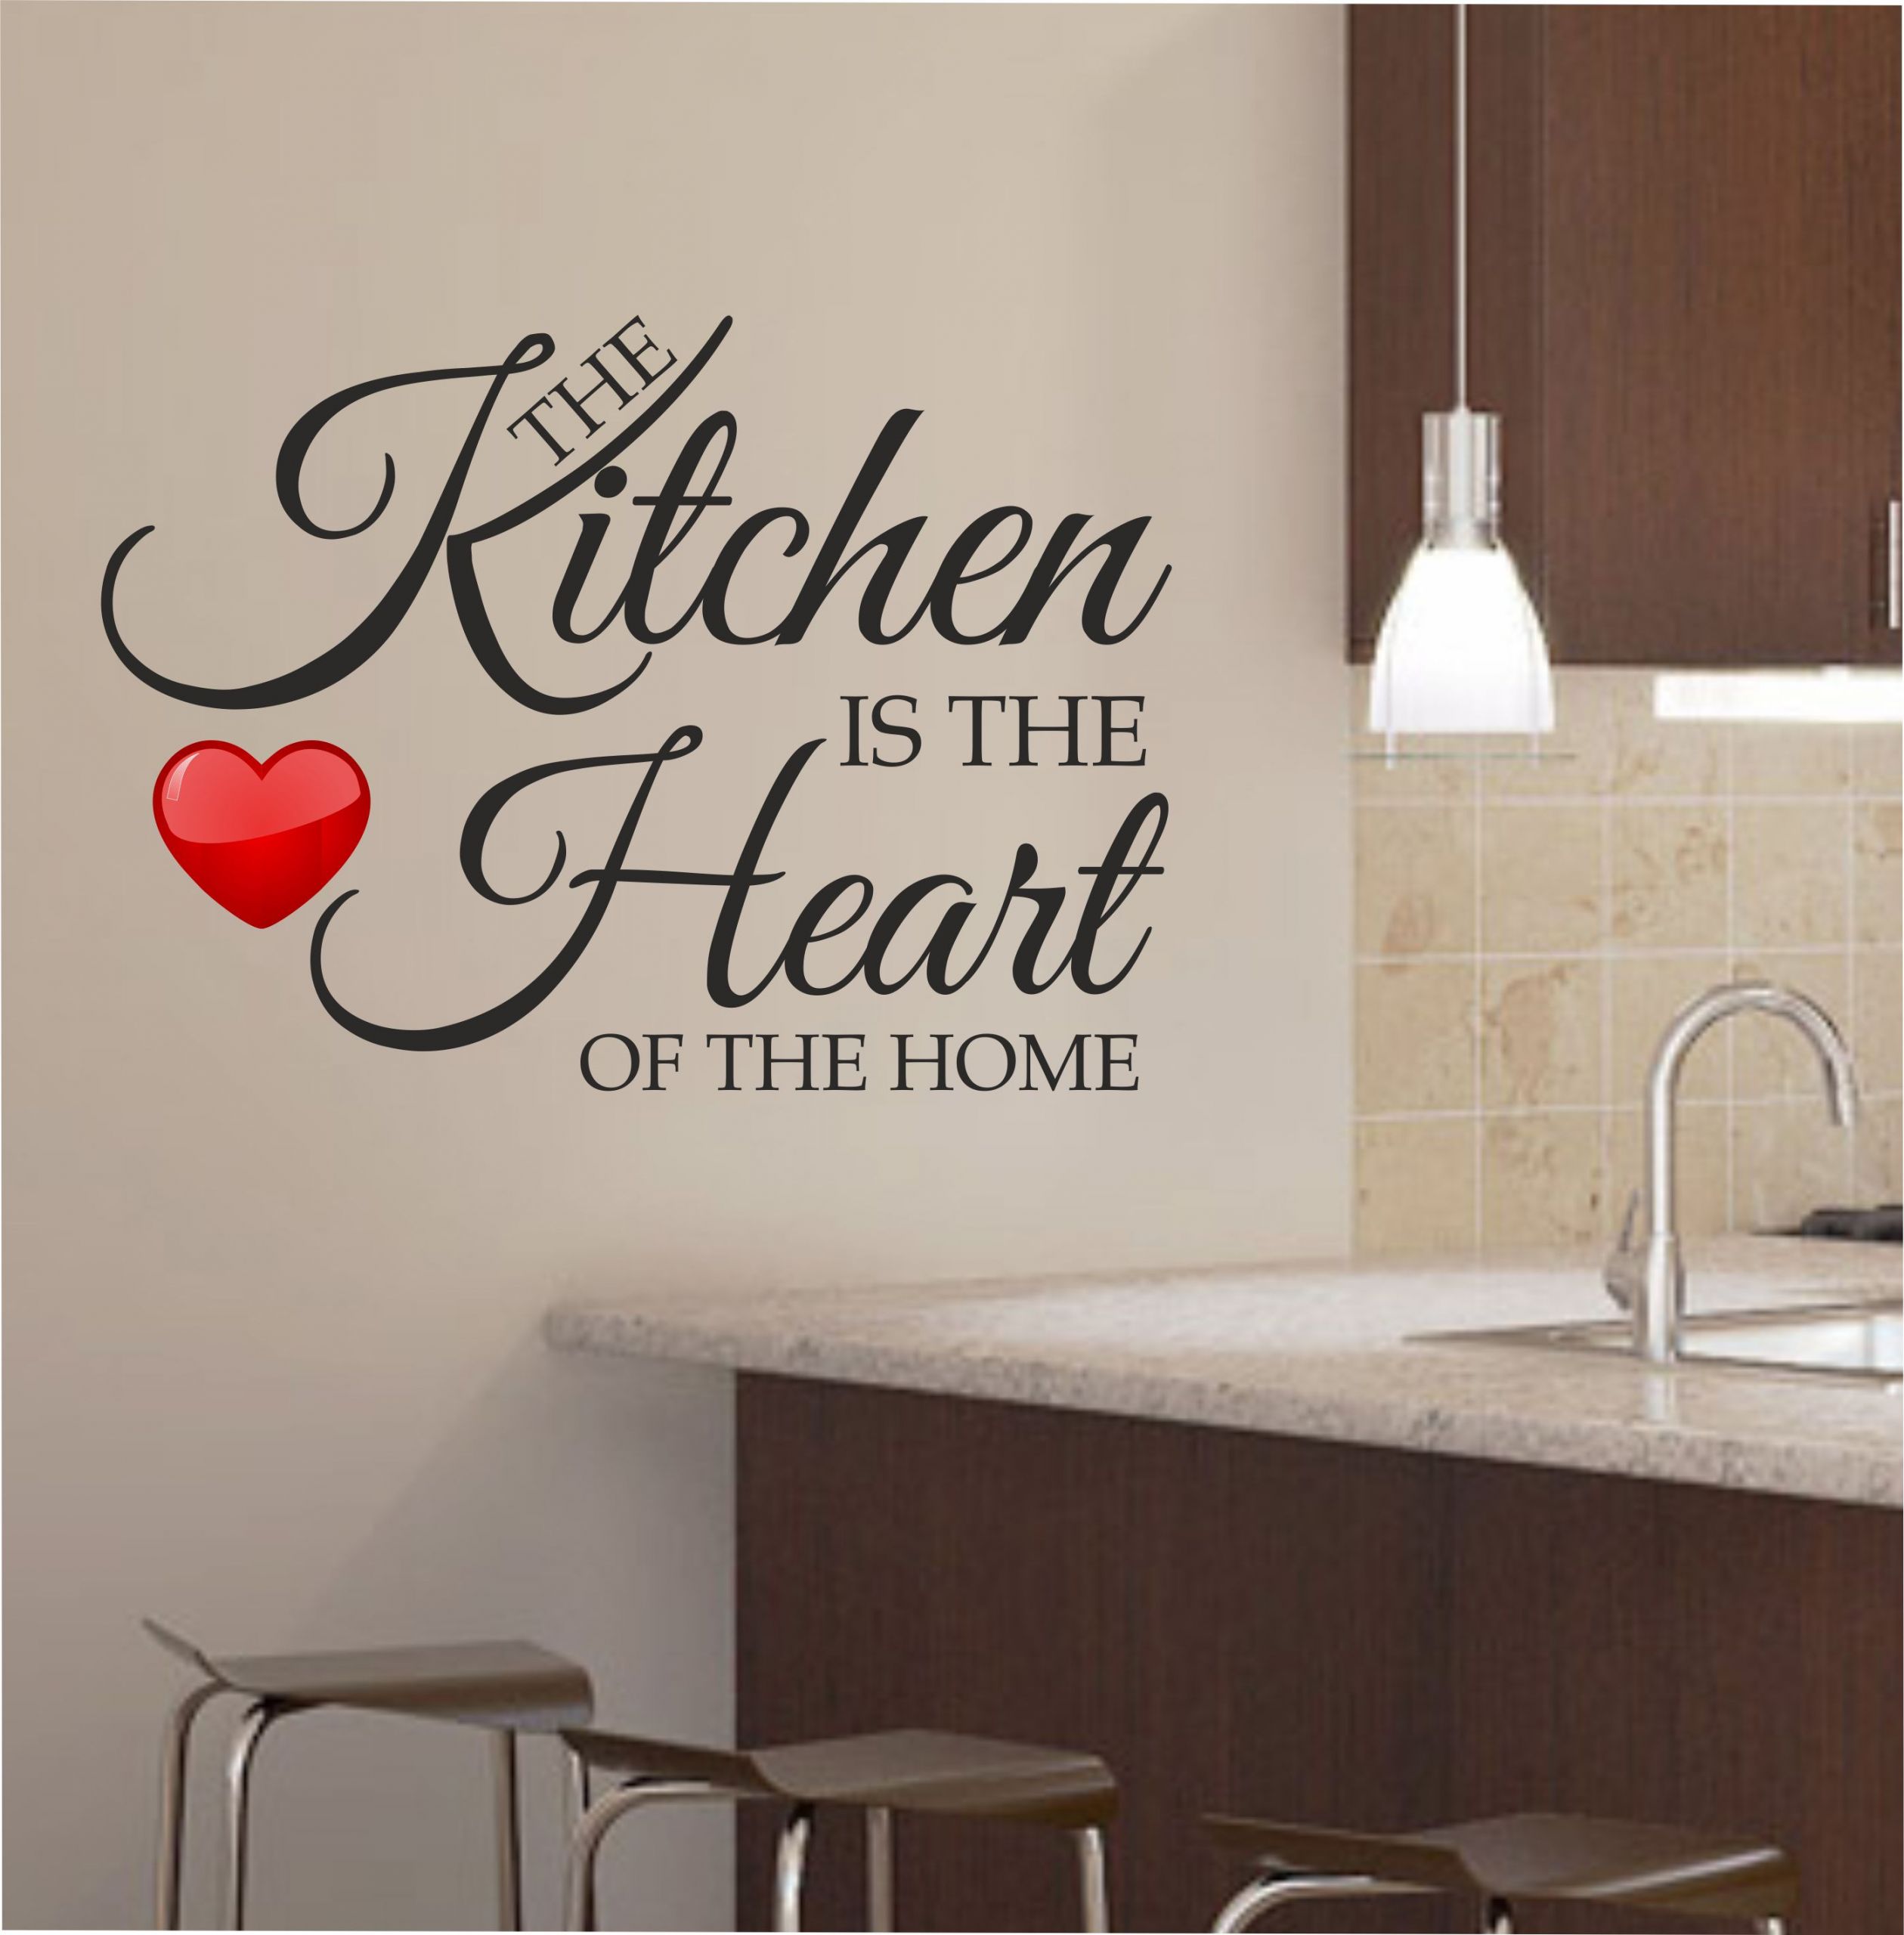 Wall Art For The Kitchen
 Kitchen Wall Art For a More Fresh Kitchen Decor